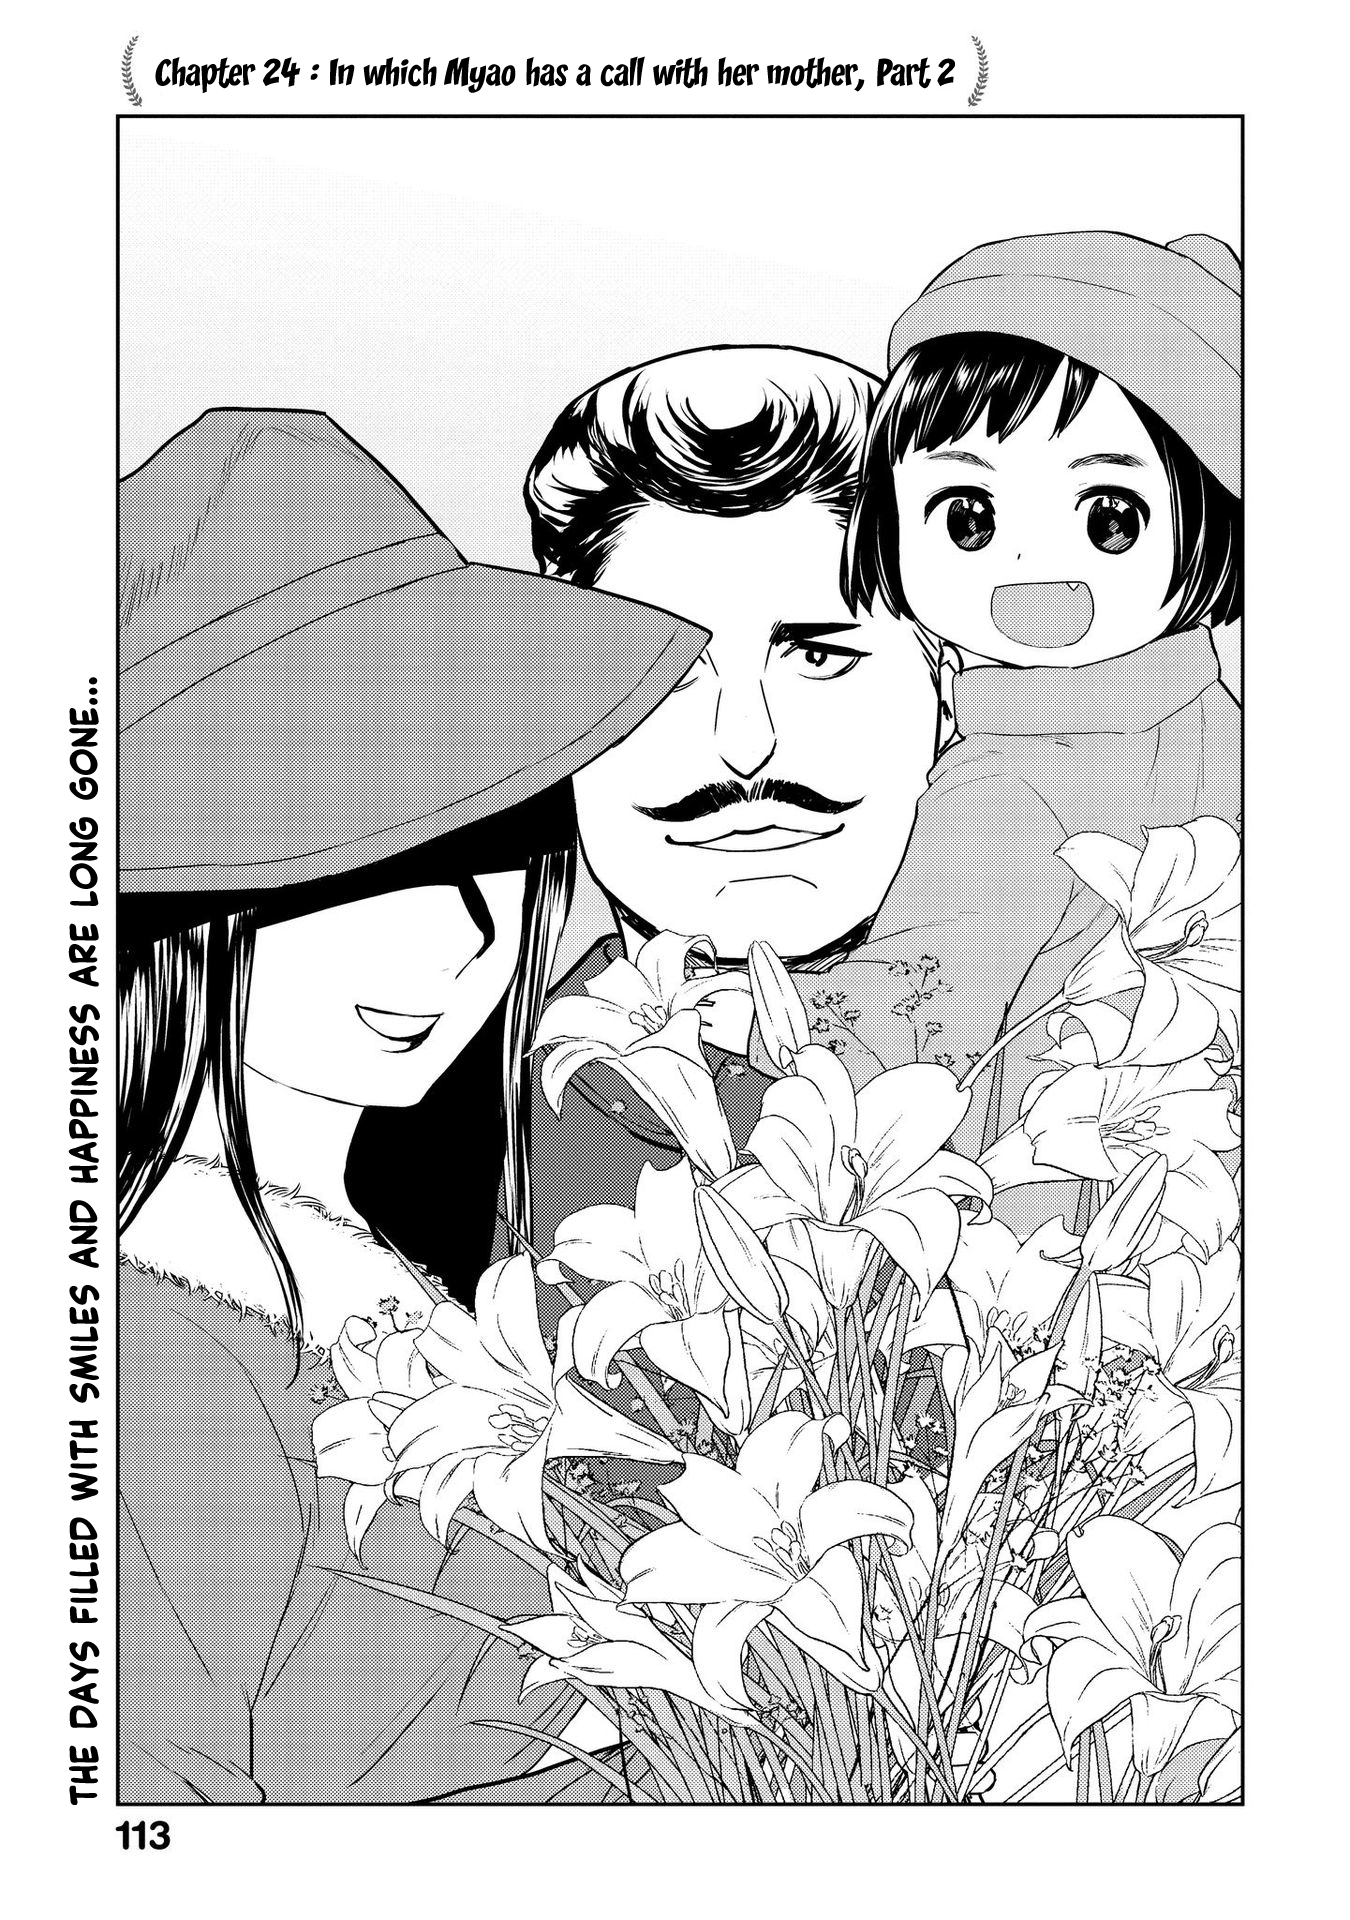 Oh, Our General Myao Vol.3 Chapter 24: In Which Myao Has A Call With Her Mother (Part 2) - Picture 1